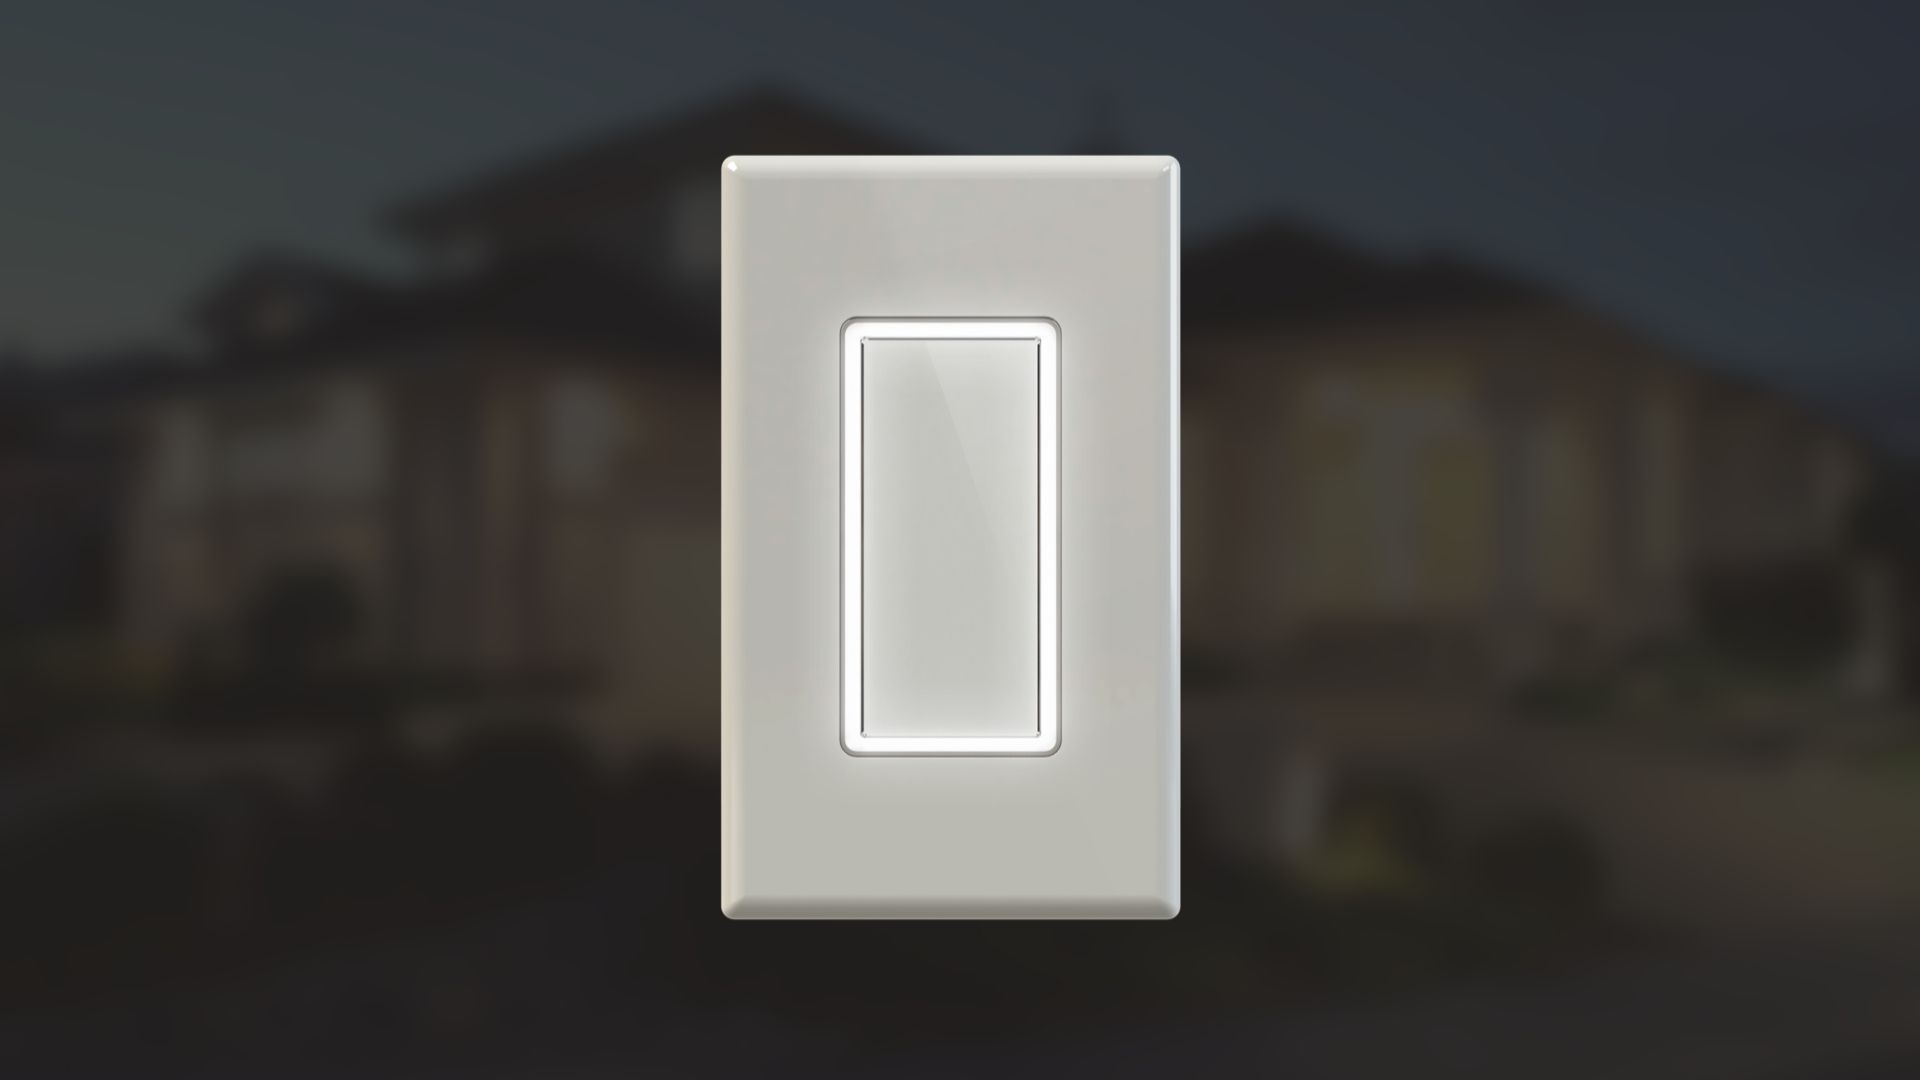 lightpad the intelligent light switch that wants to control your home image 1